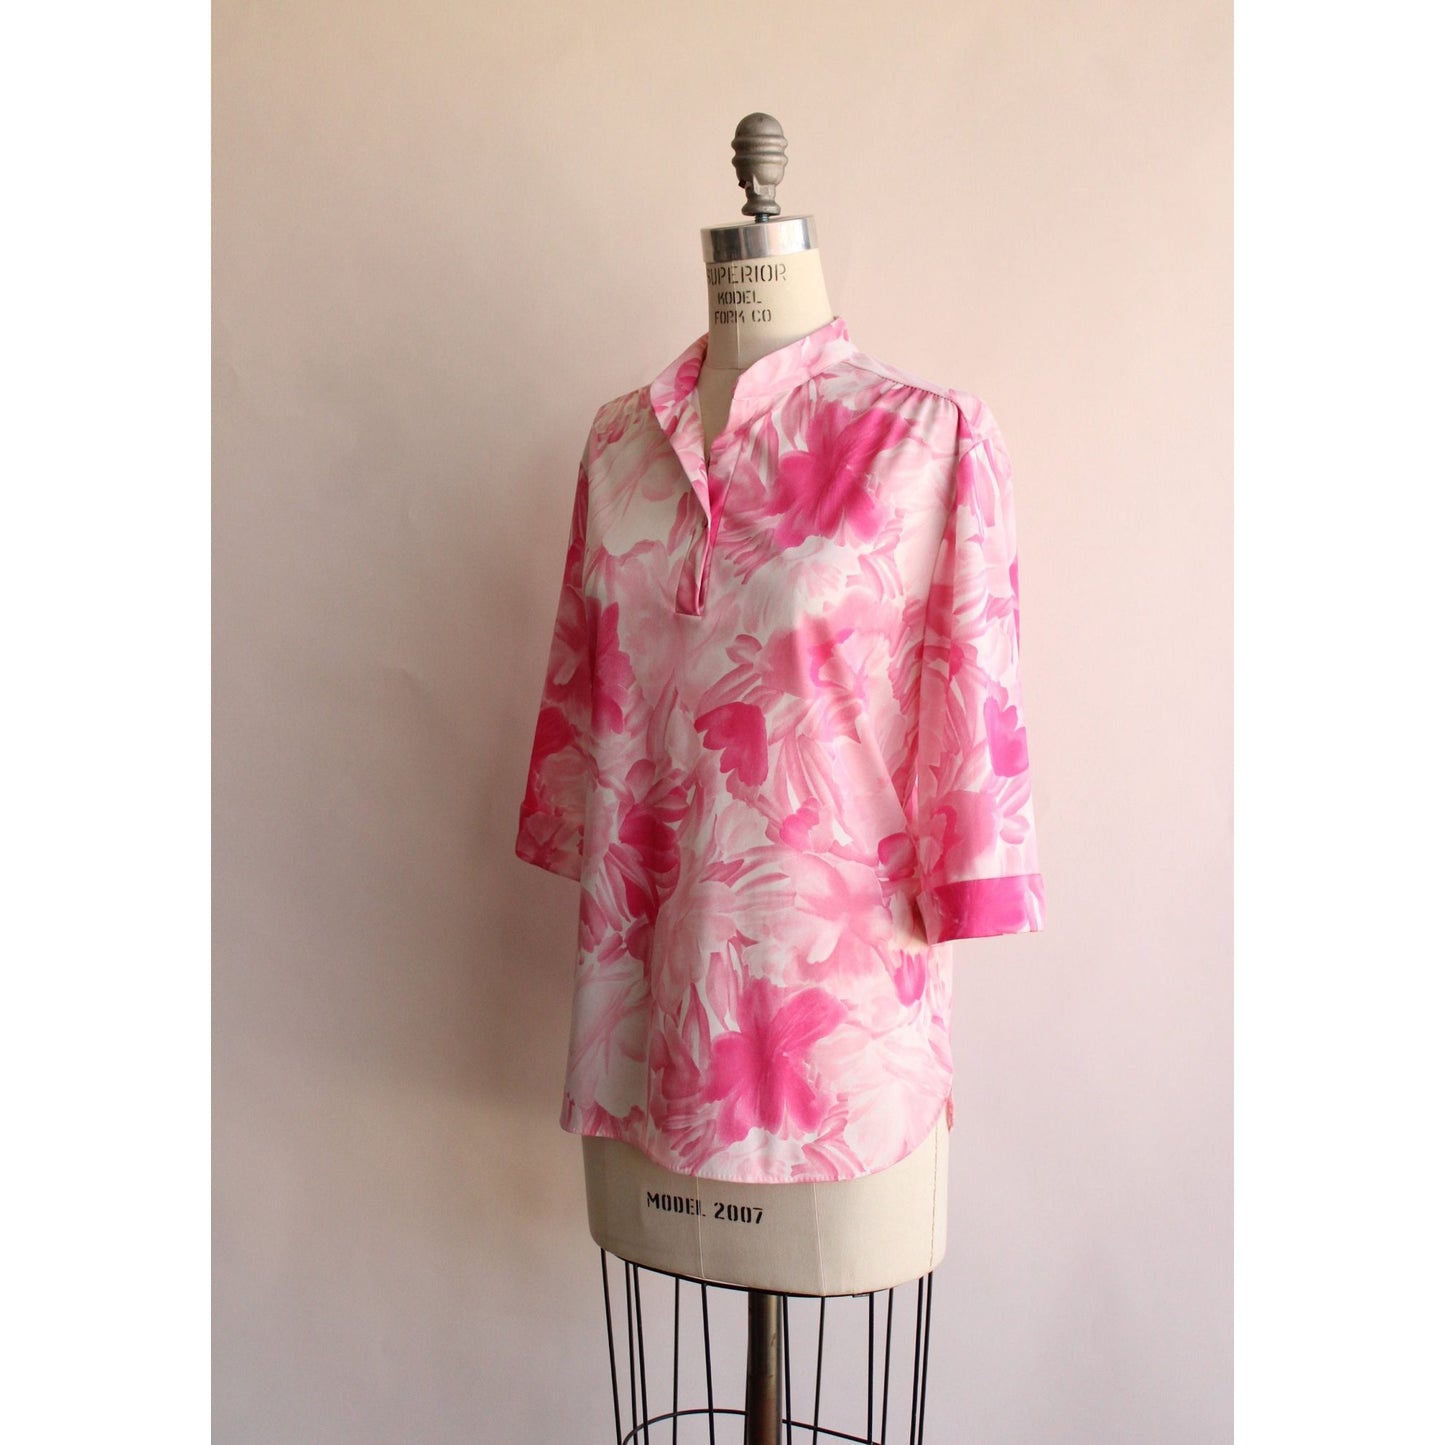 Vintage 1960s Ro-Vel Pink And White Floral Print Top